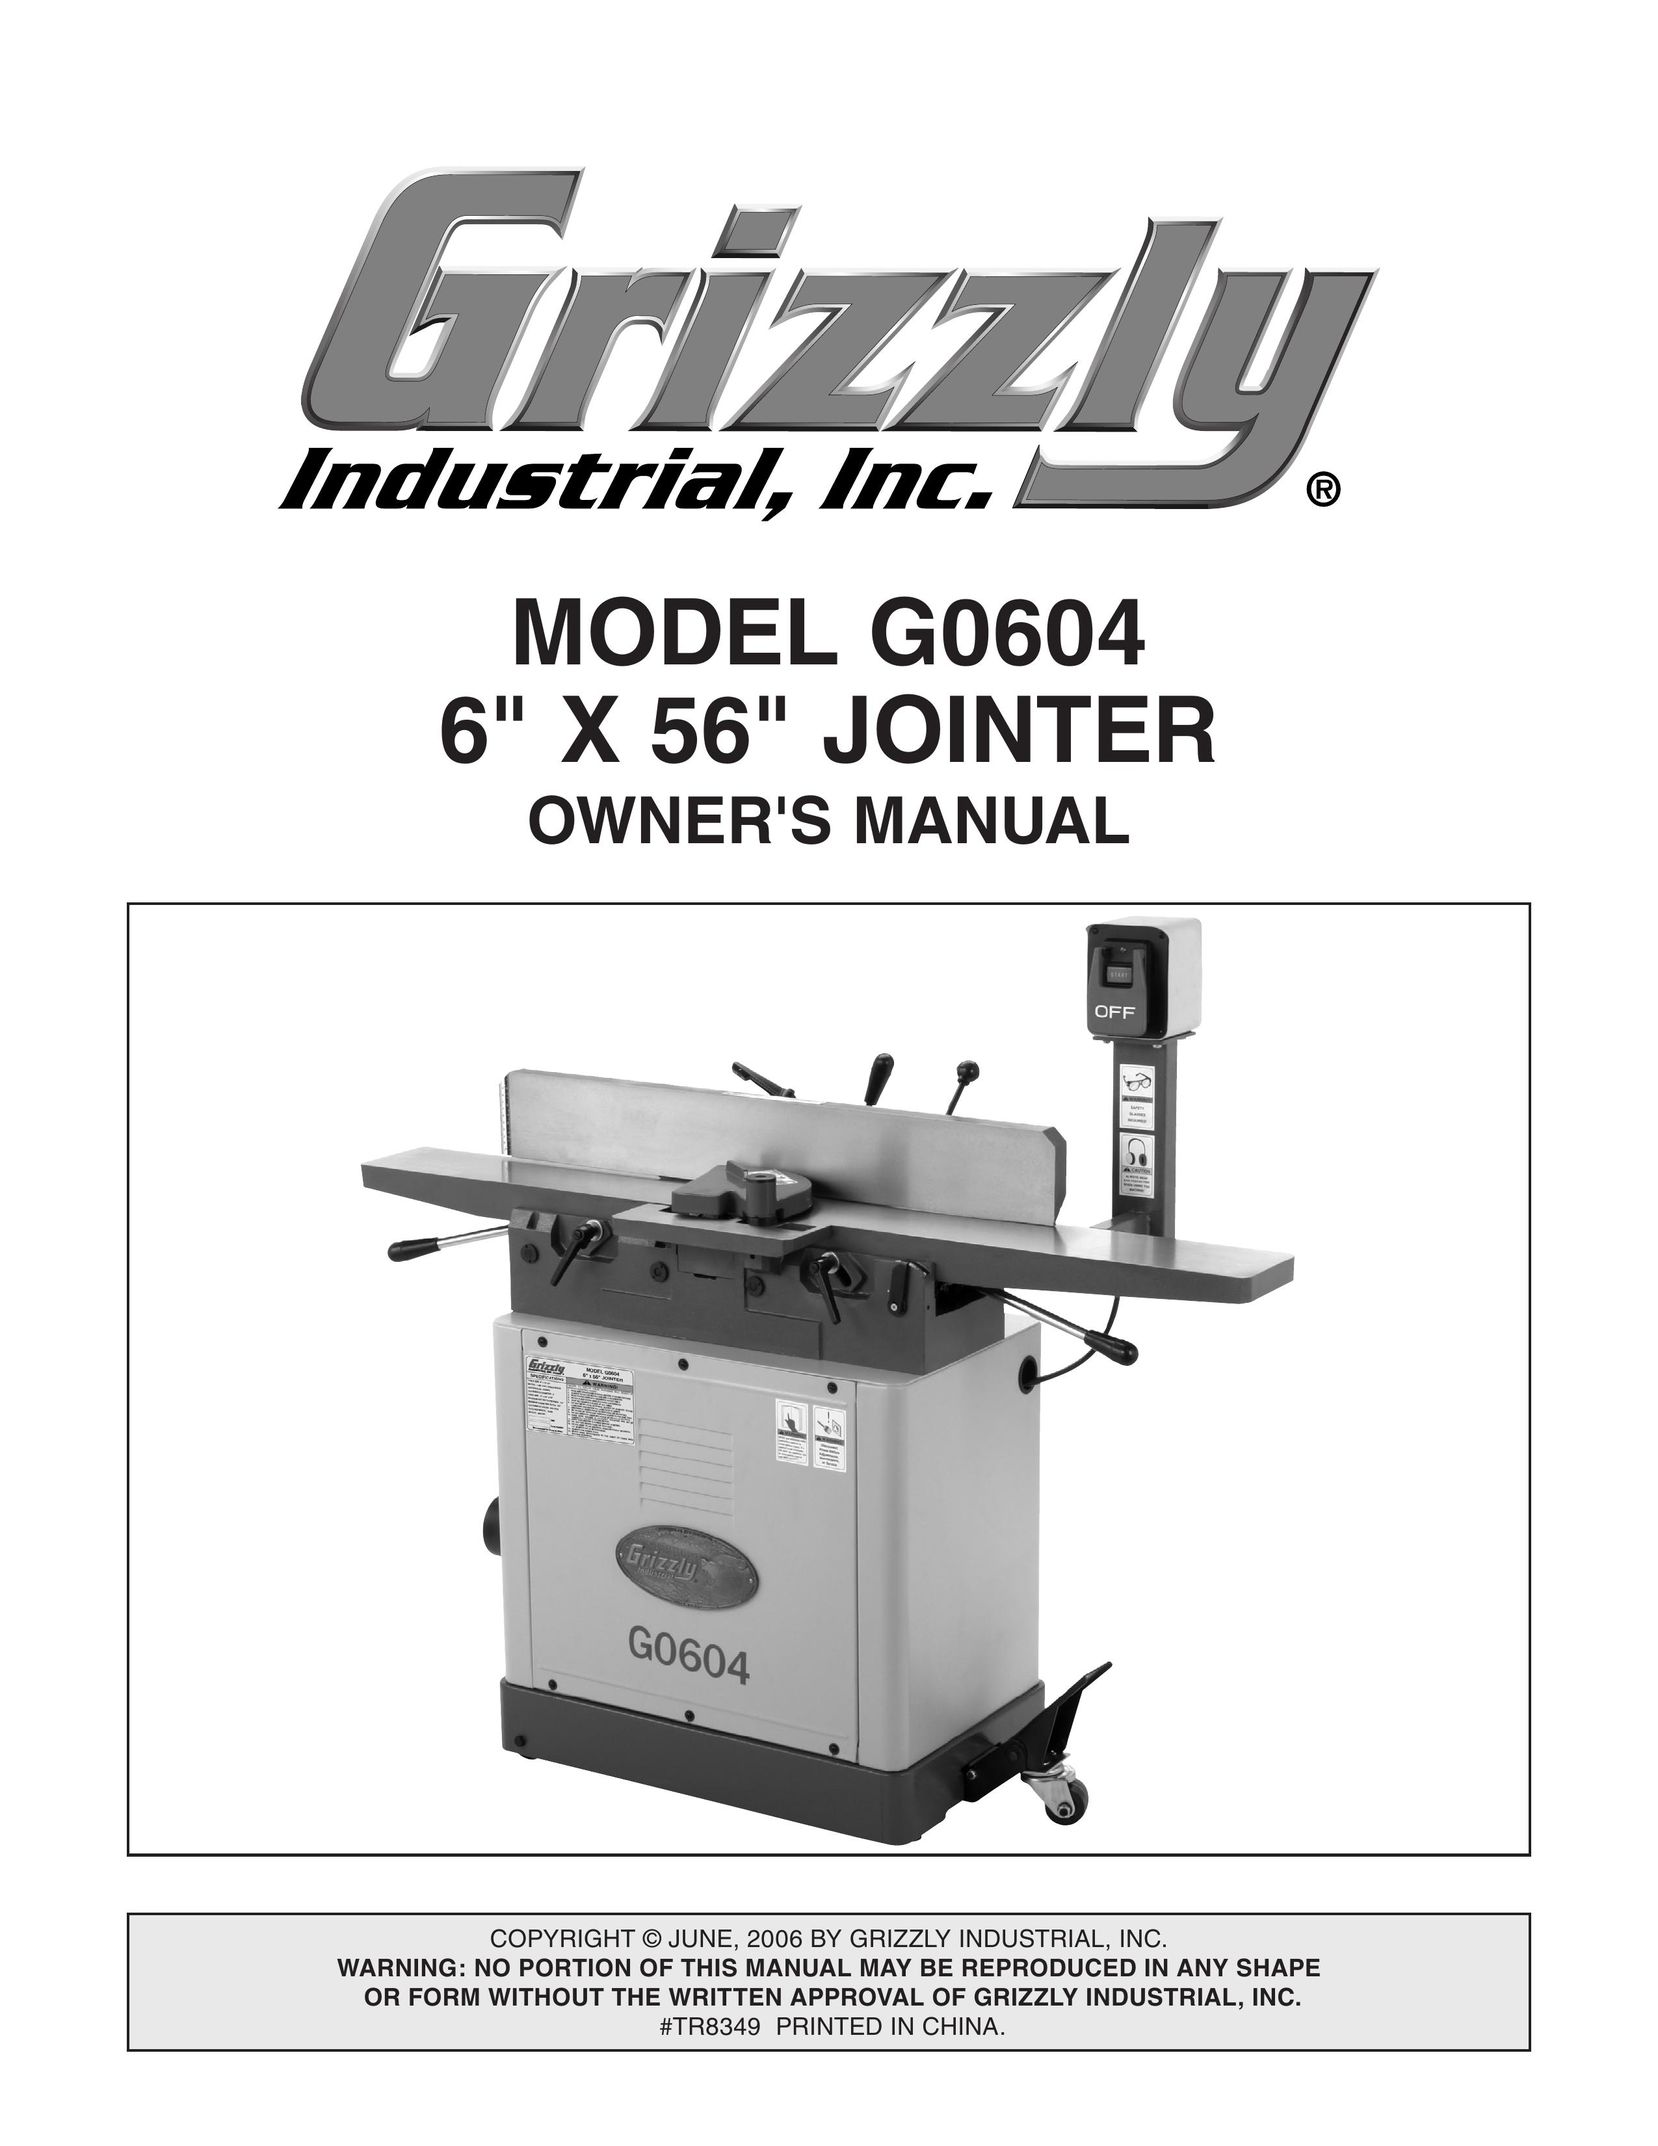 Grizzly G0604 Biscuit Joiner User Manual